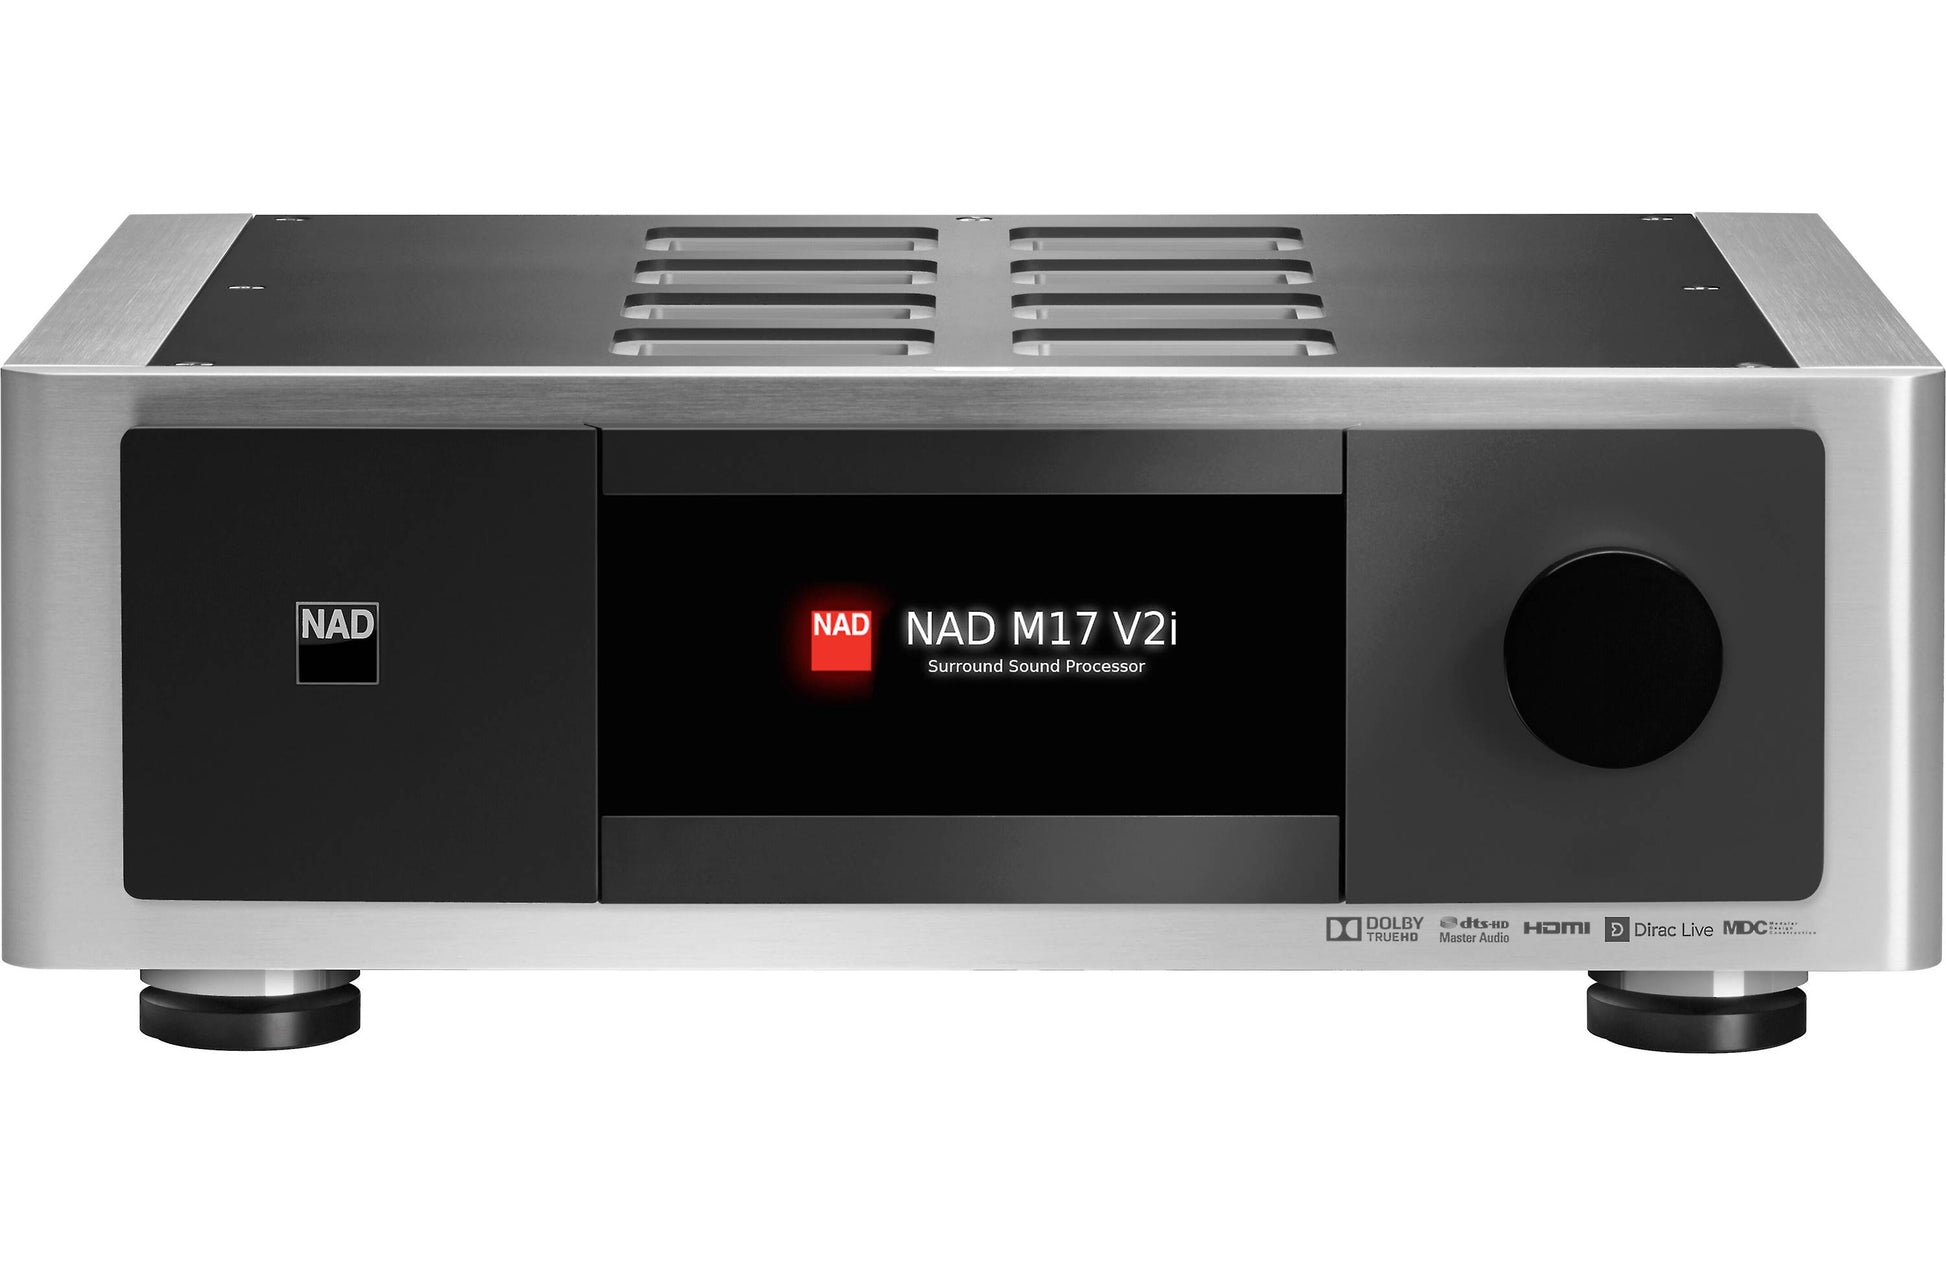 NAD Master Series M17 V2i Home theater preamp/processor with 11.2-channel processing, Dolby Atmos®, Apple AirPlay® 2, and Dirac Live® room correction